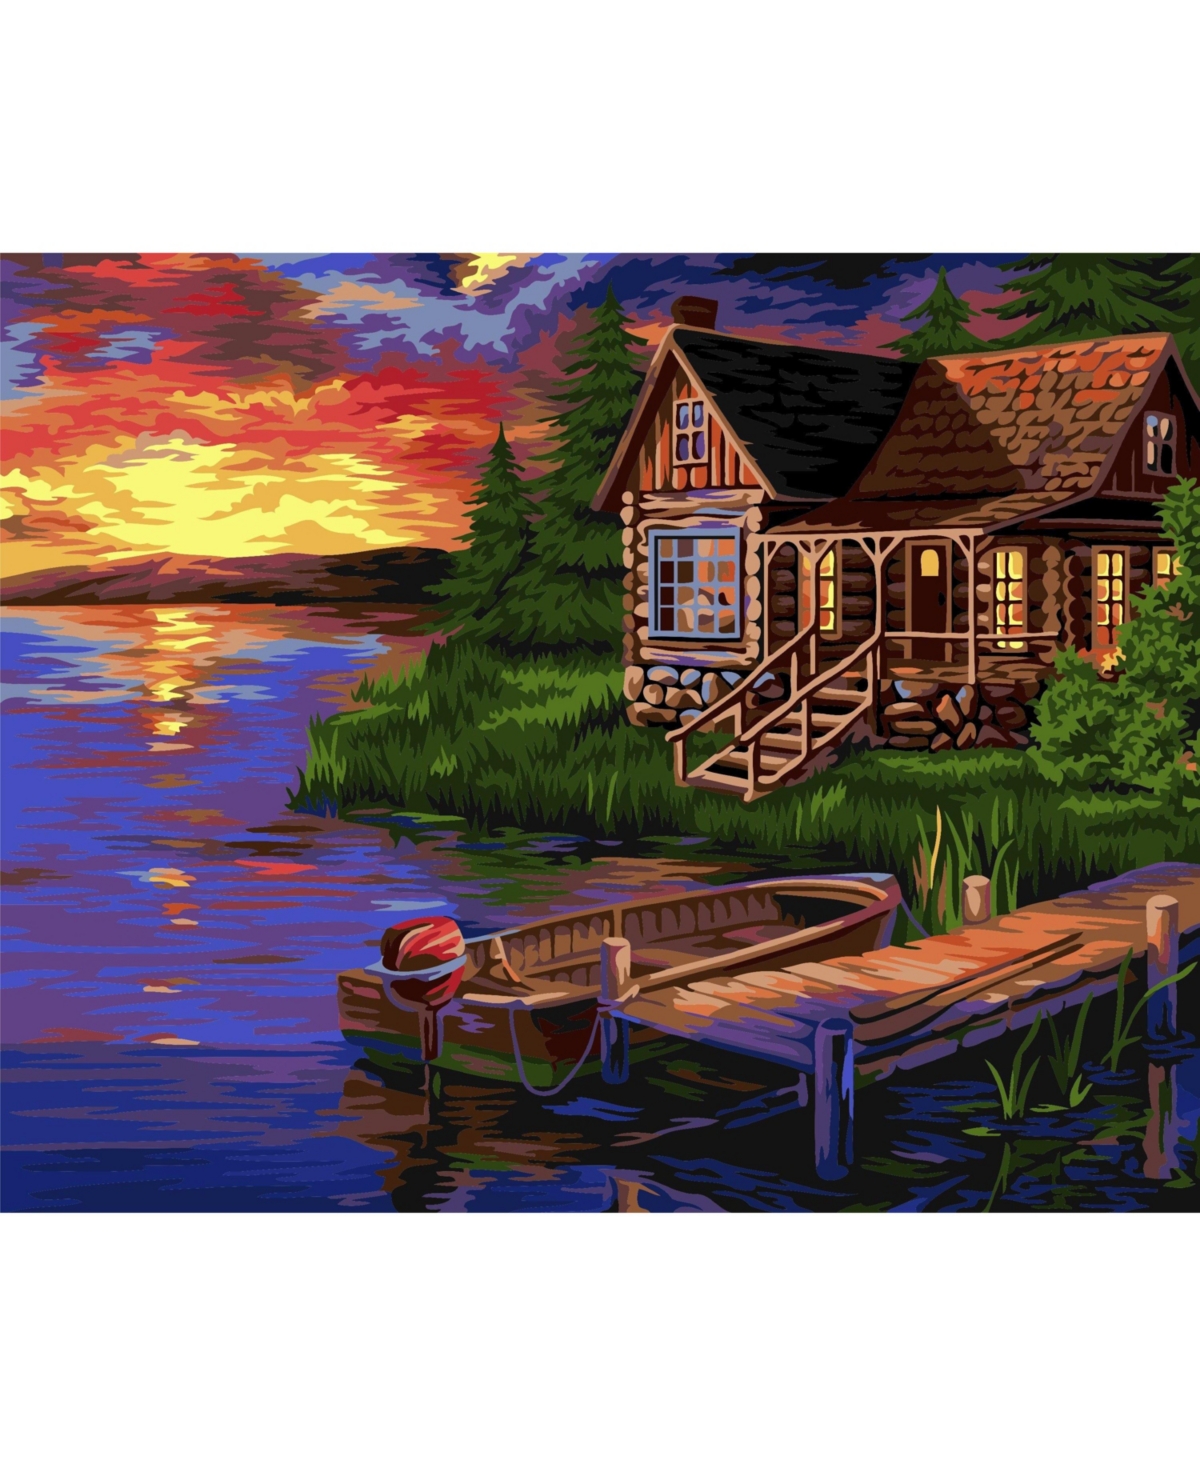 Painting by Numbers Kit Crafting Spark Evening Harbour A090 19.69 x 15.75 in